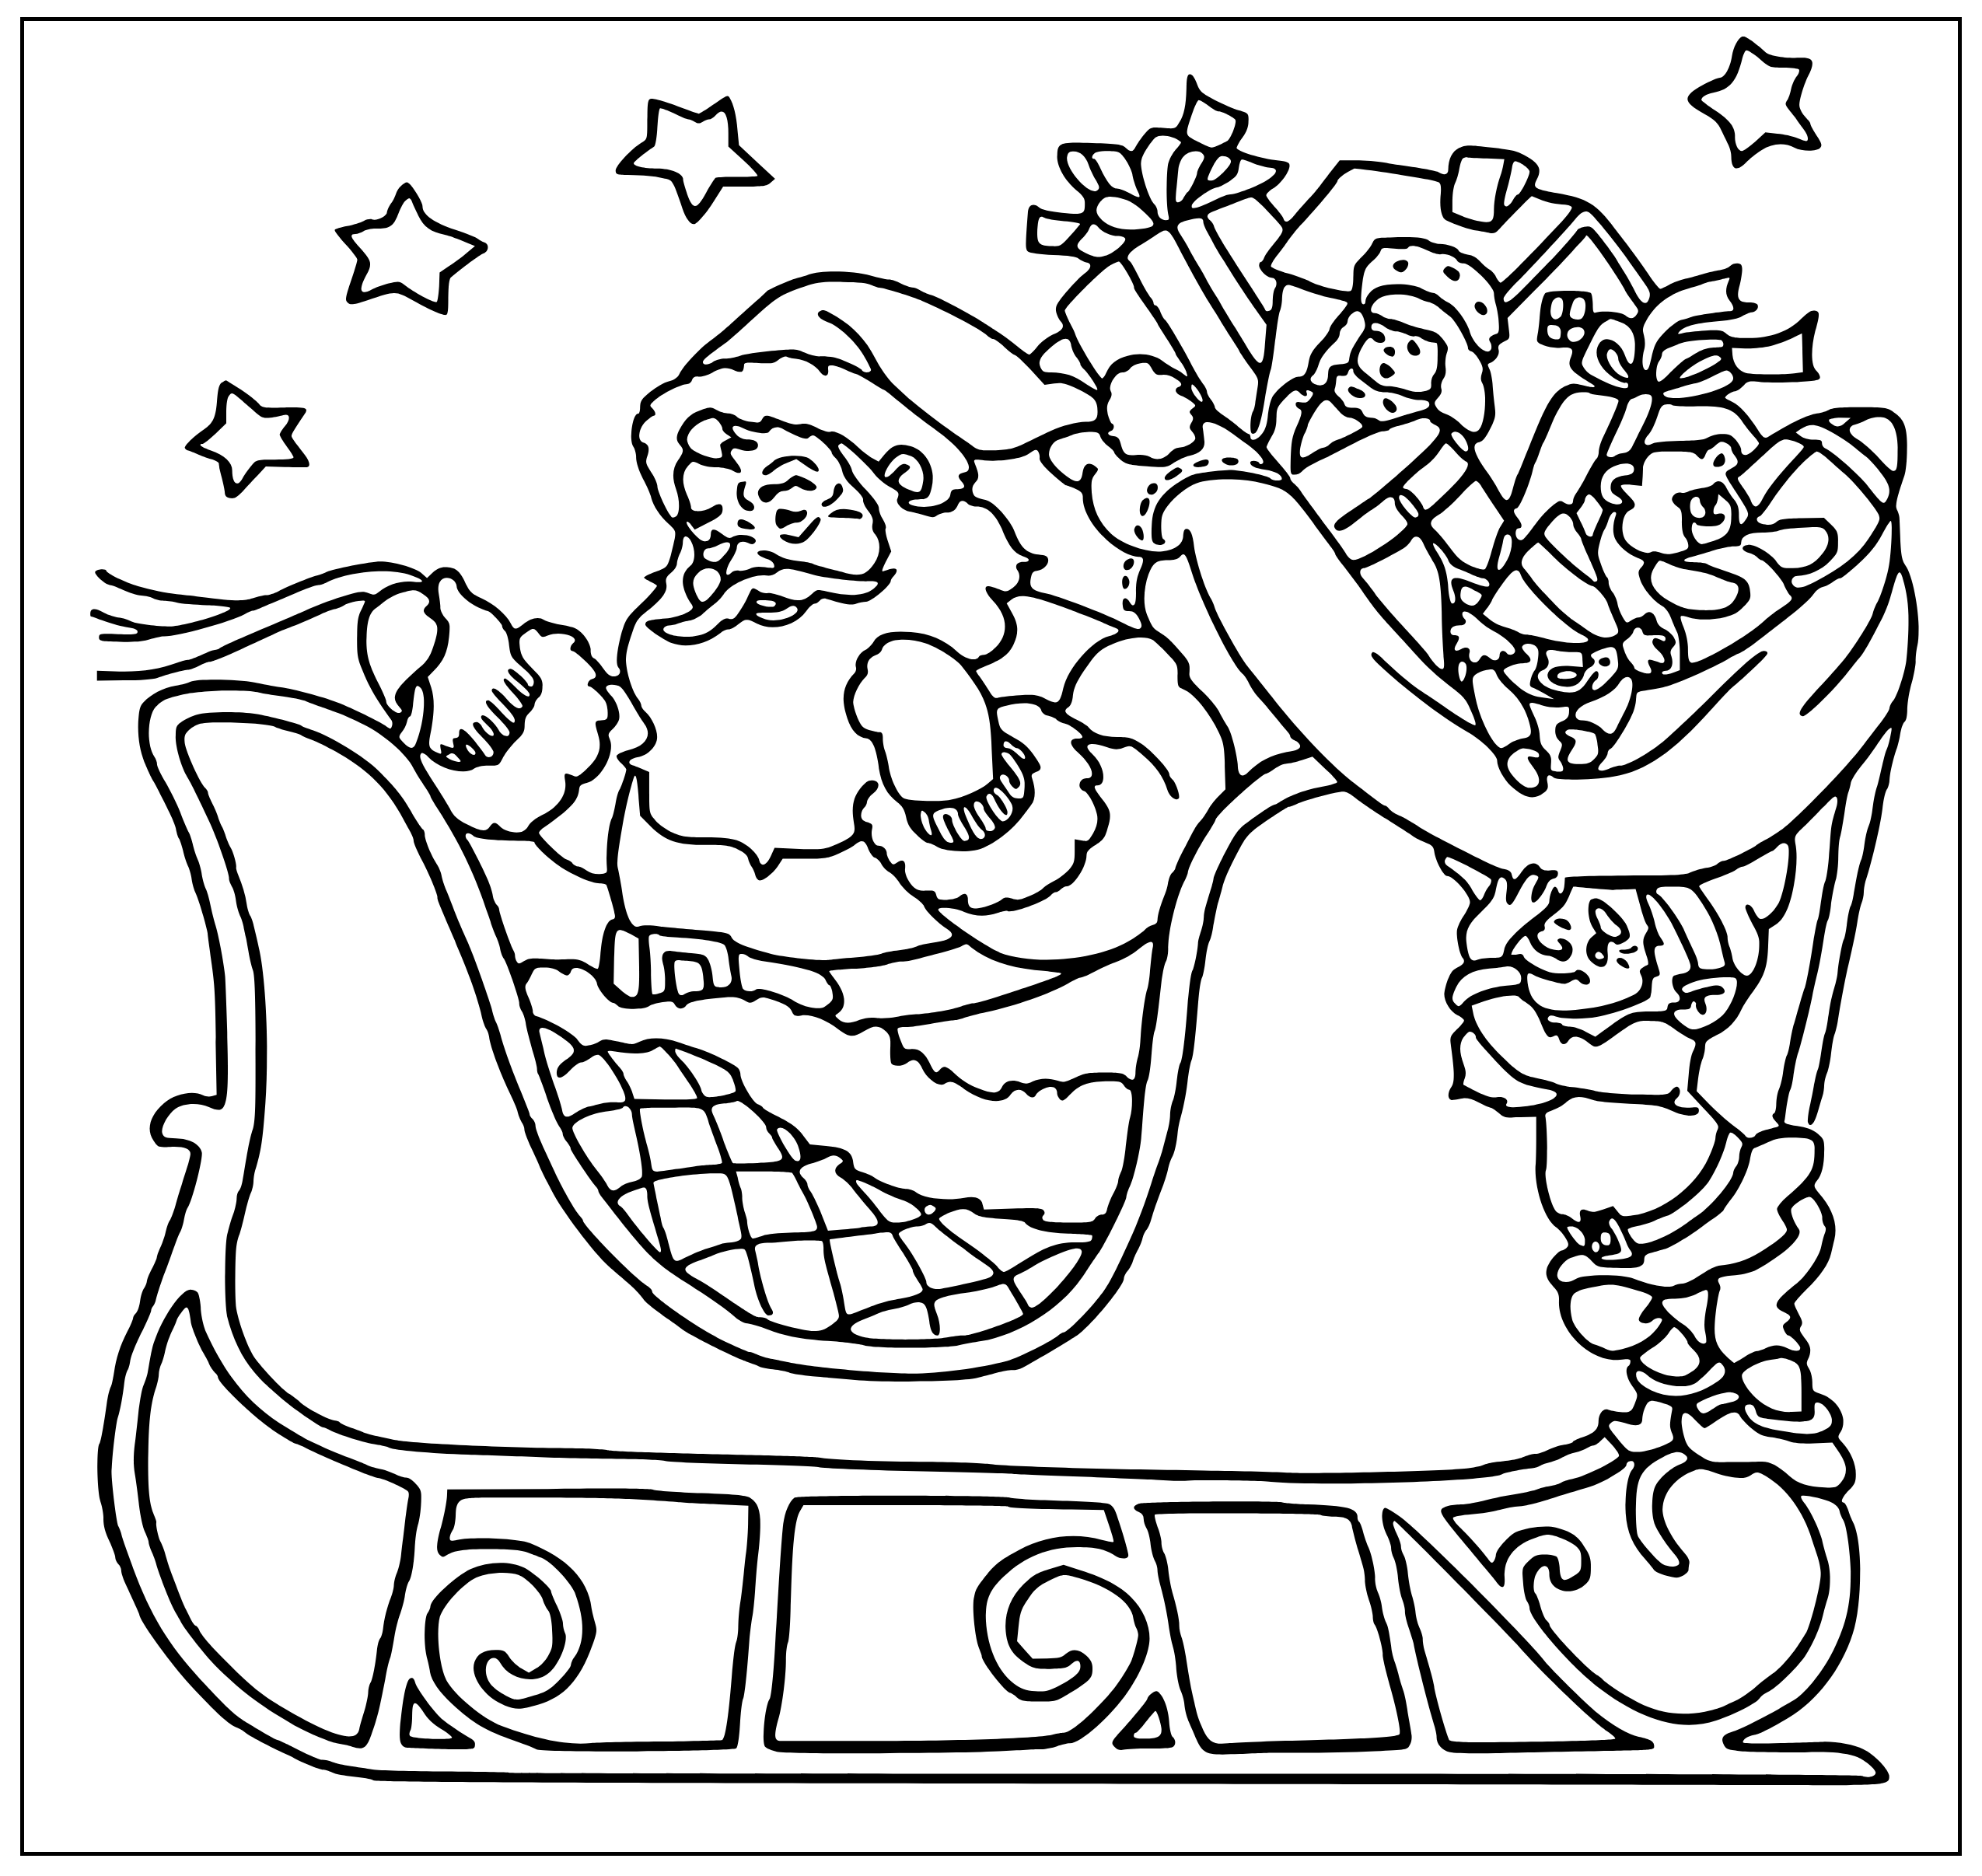 Printable santa and elves are sliding on the snowmobile Coloring Page for kids.